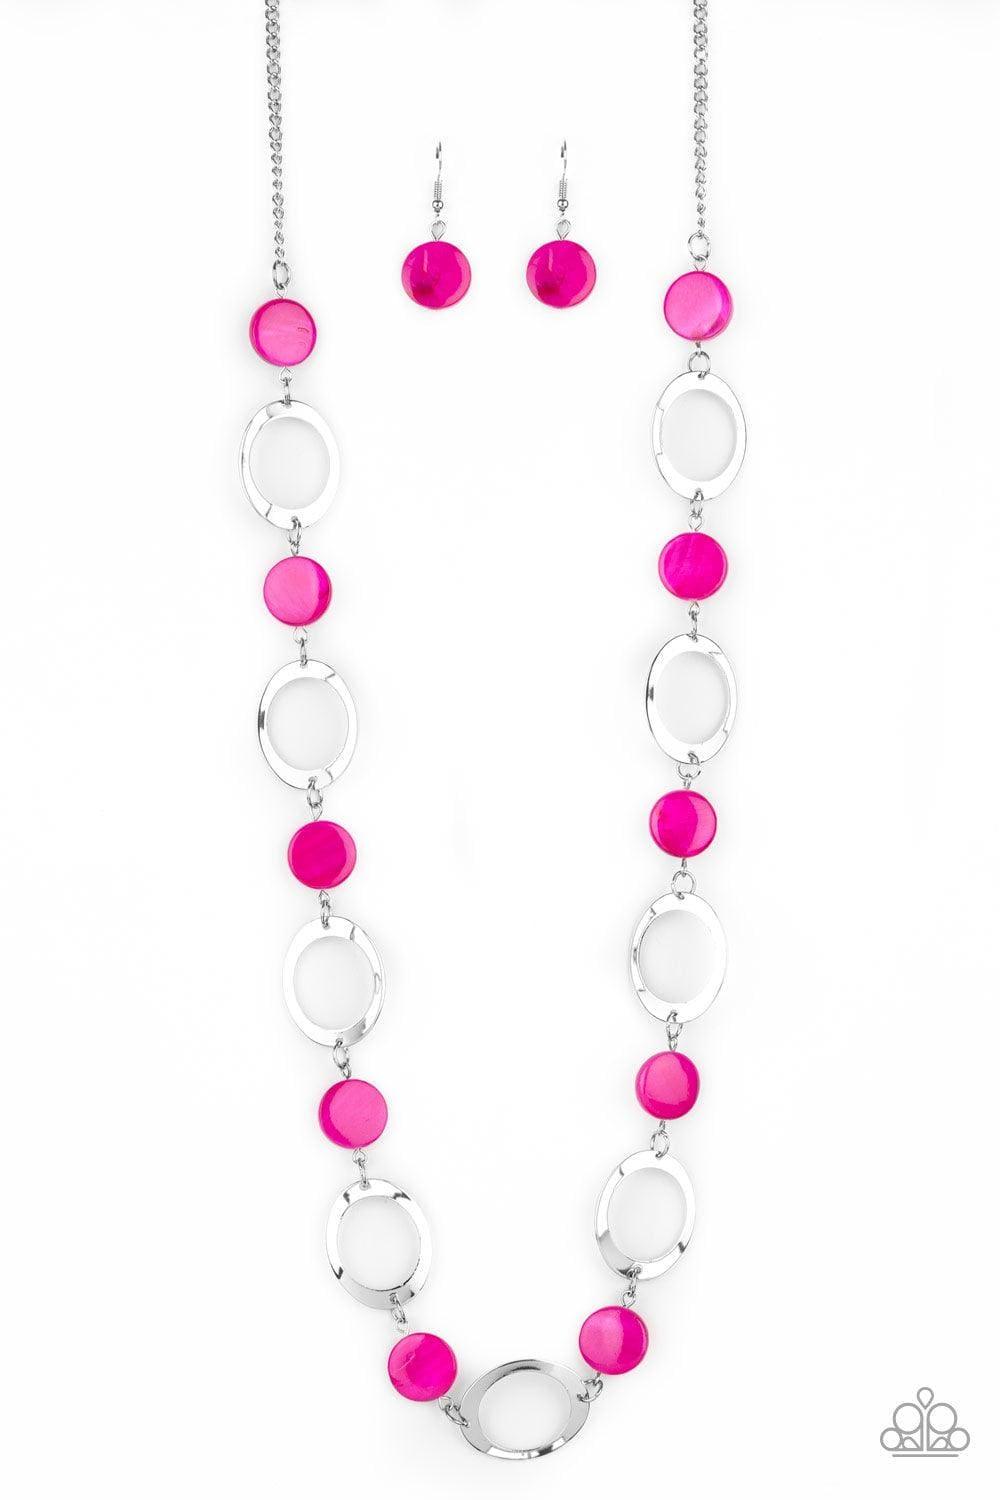 Paparazzi Accessories - Shell Your Soul - Pink Necklace - Bling by JessieK